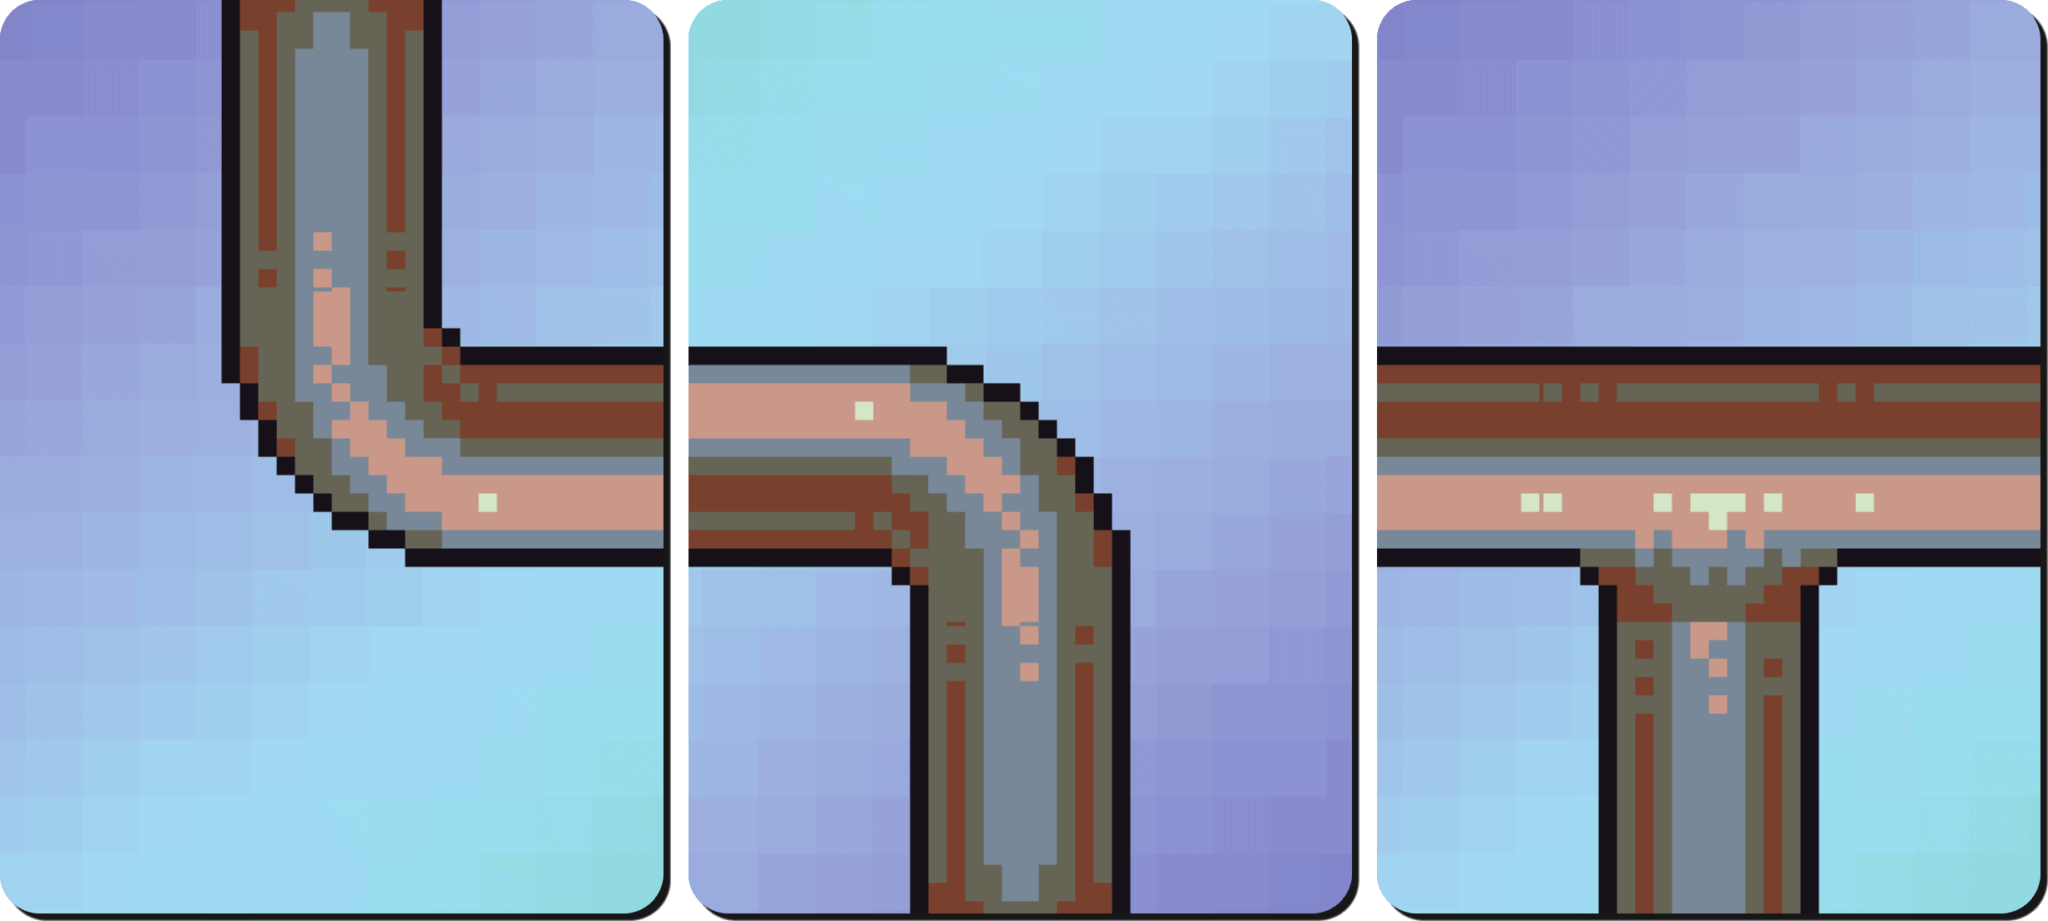 Pipes 1